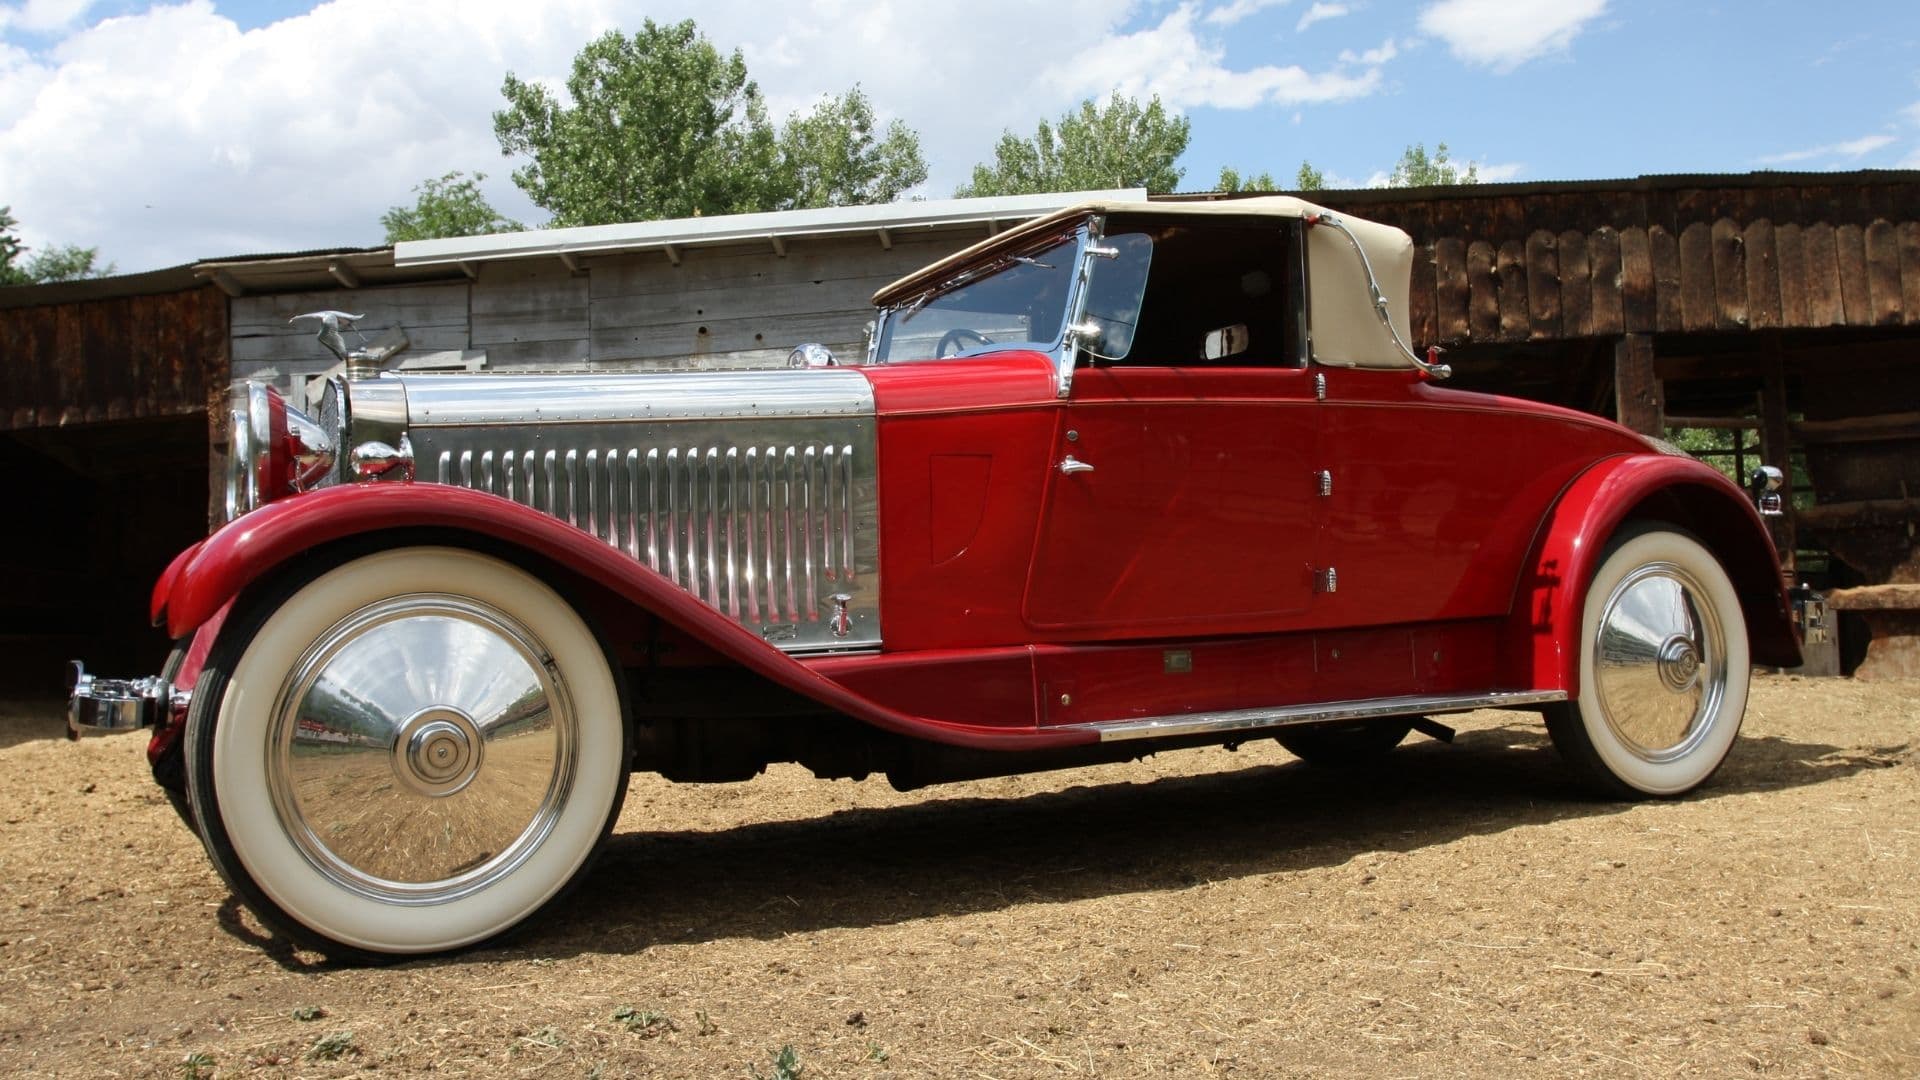 How a Novelist Bought a 1926 Hispano-Suiza at Auction After Three Martinis